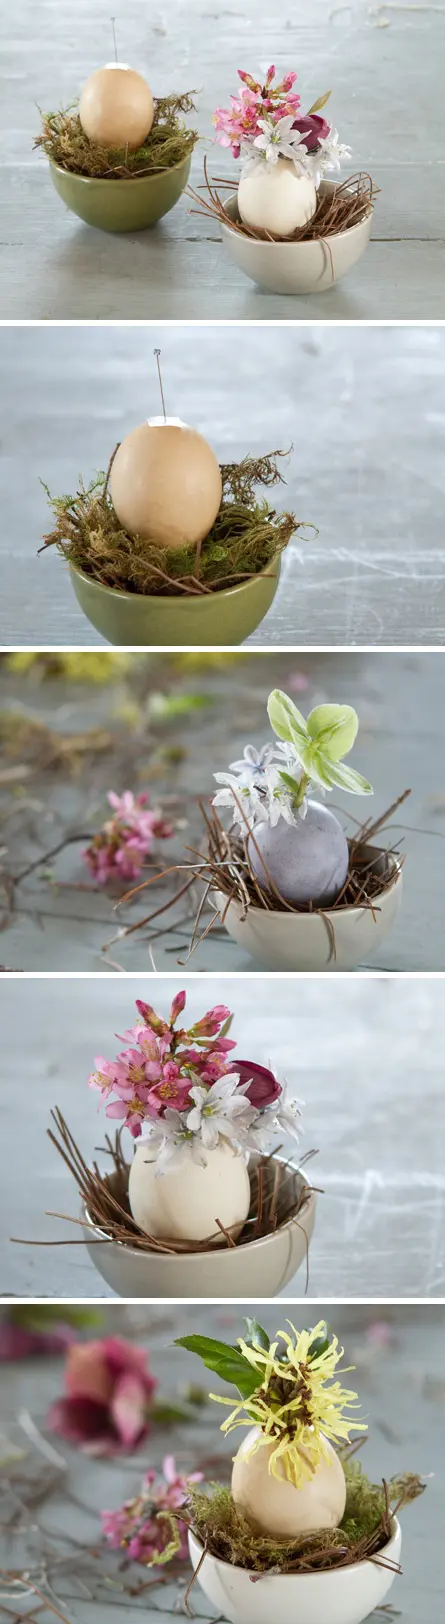 pastel bowls with moss and eggs used as vases for spring blooms is great Easter decor